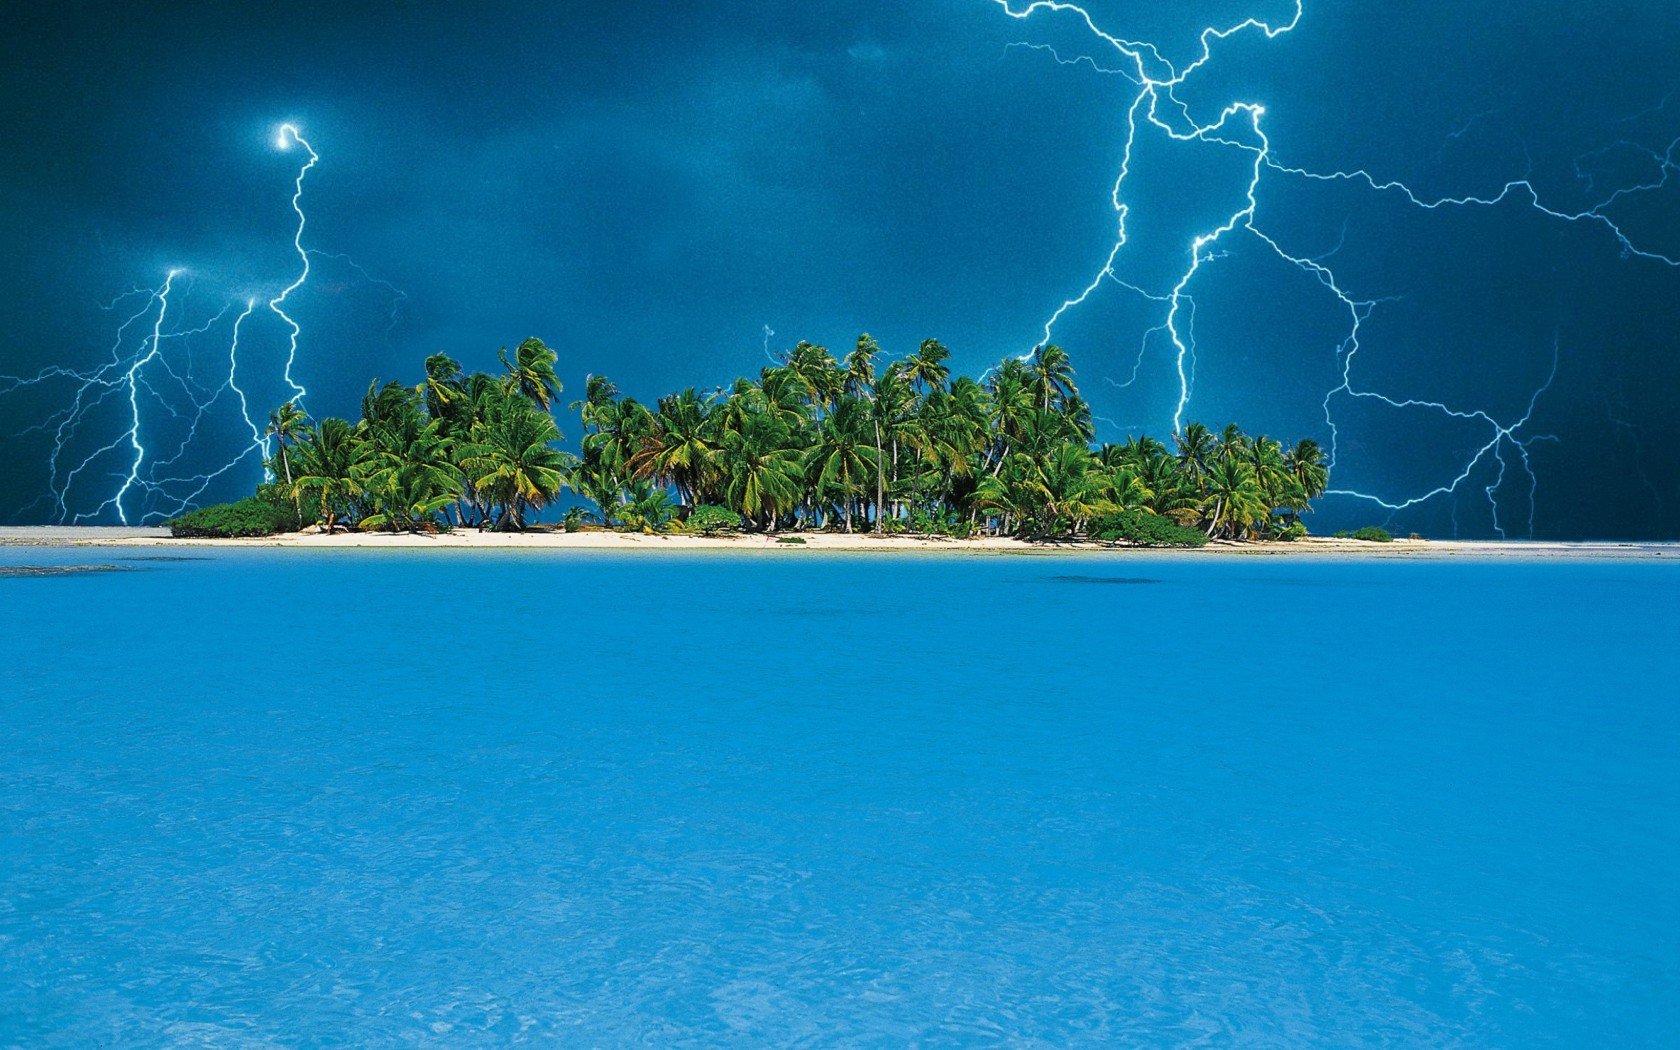 wallpapers wallpaper 17755 nature lightning storm over tropical island